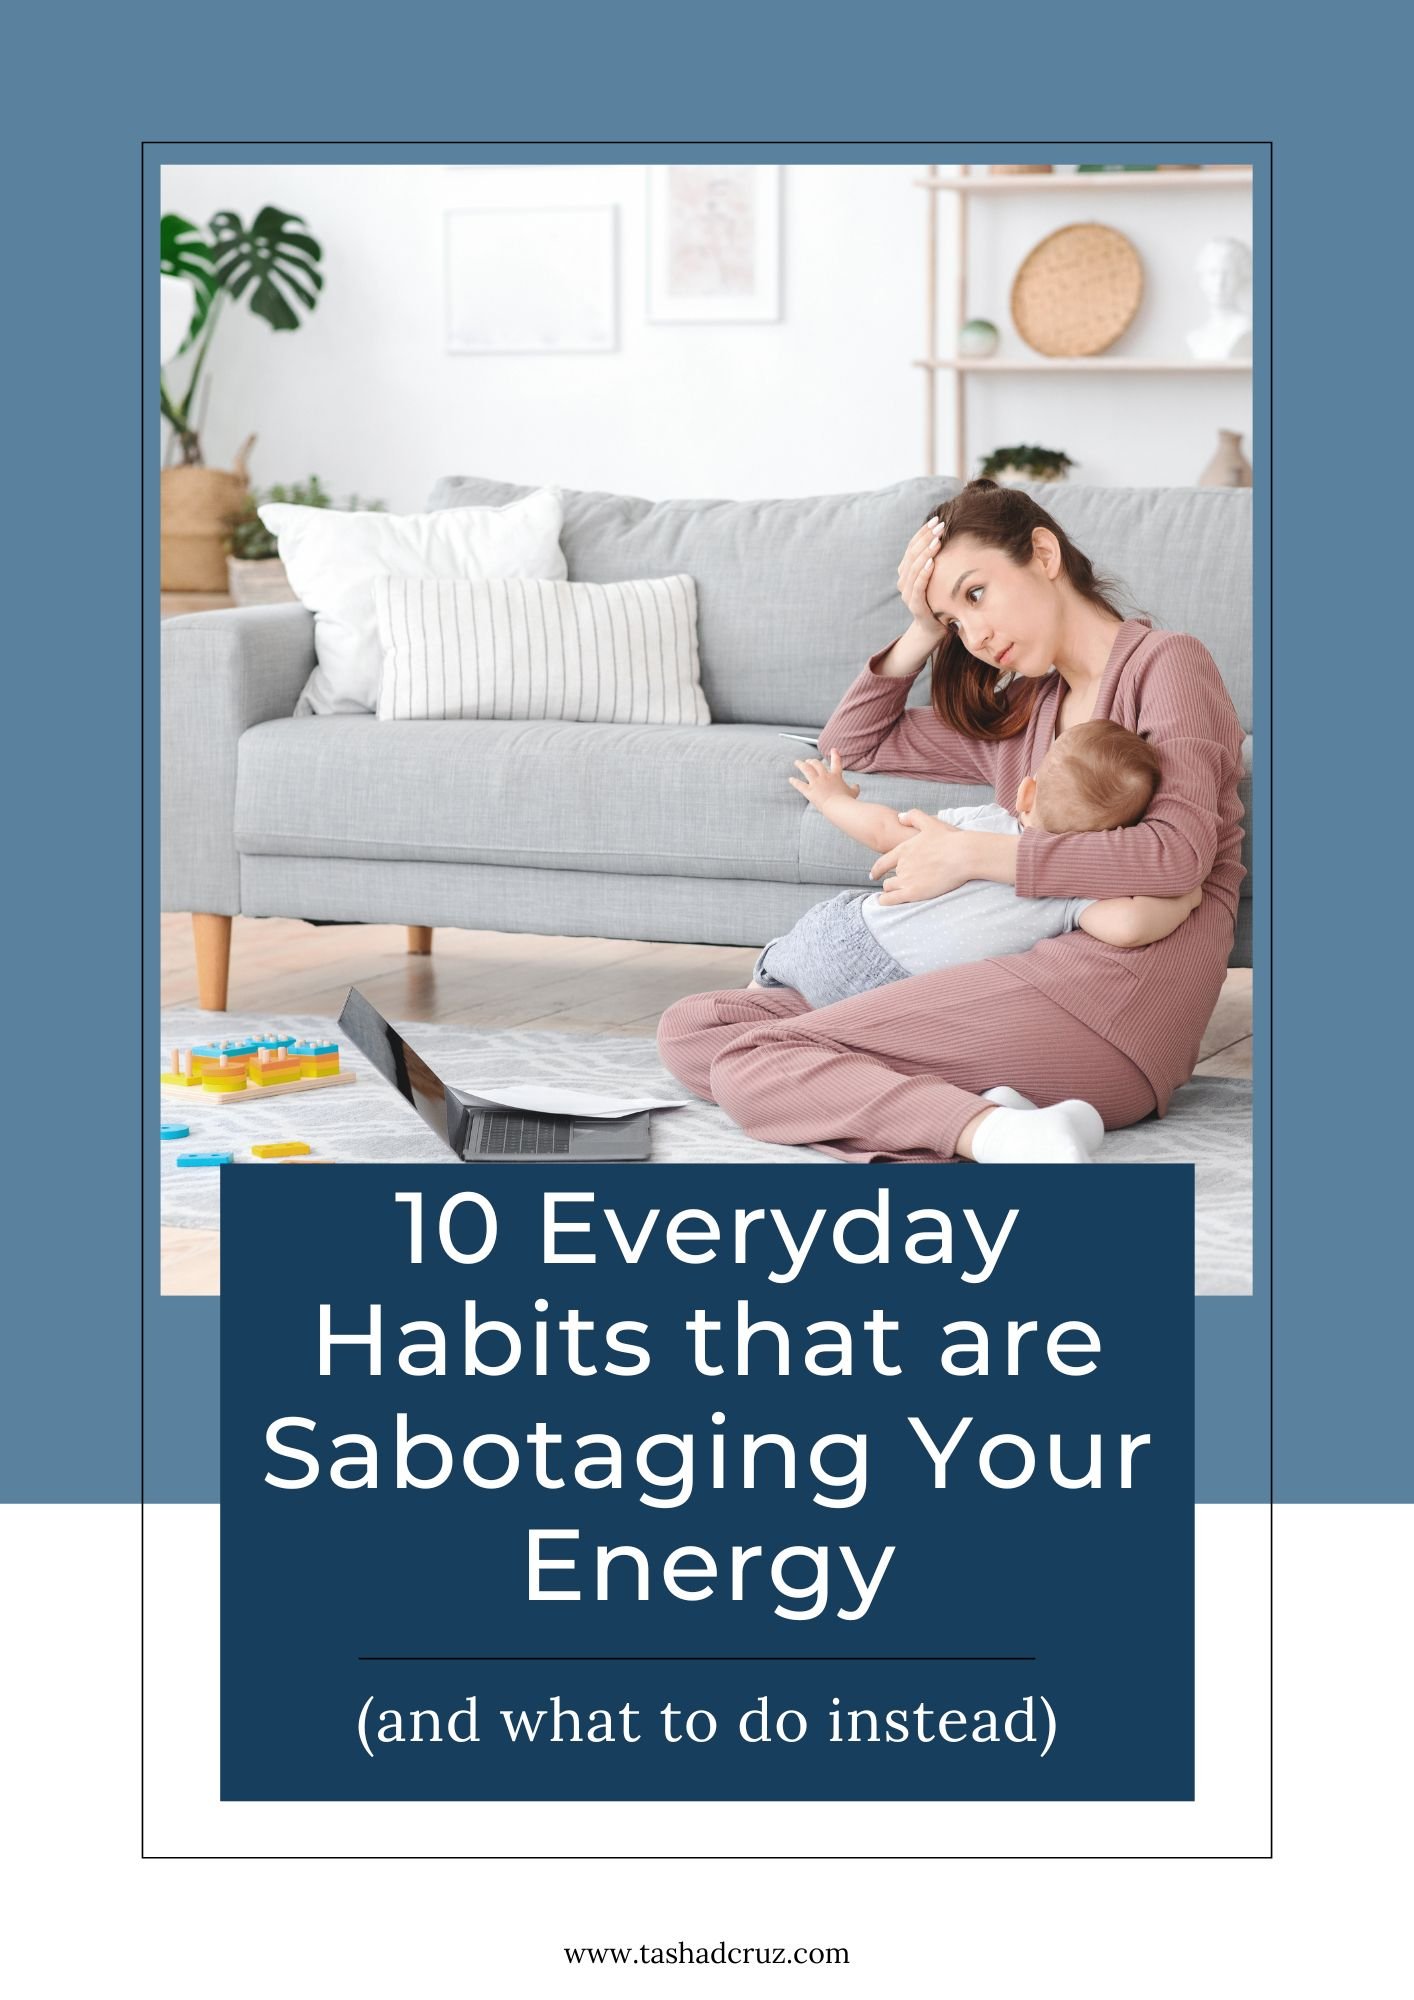 Everyday Habits that are Sabotaging Your Energy.jpeg